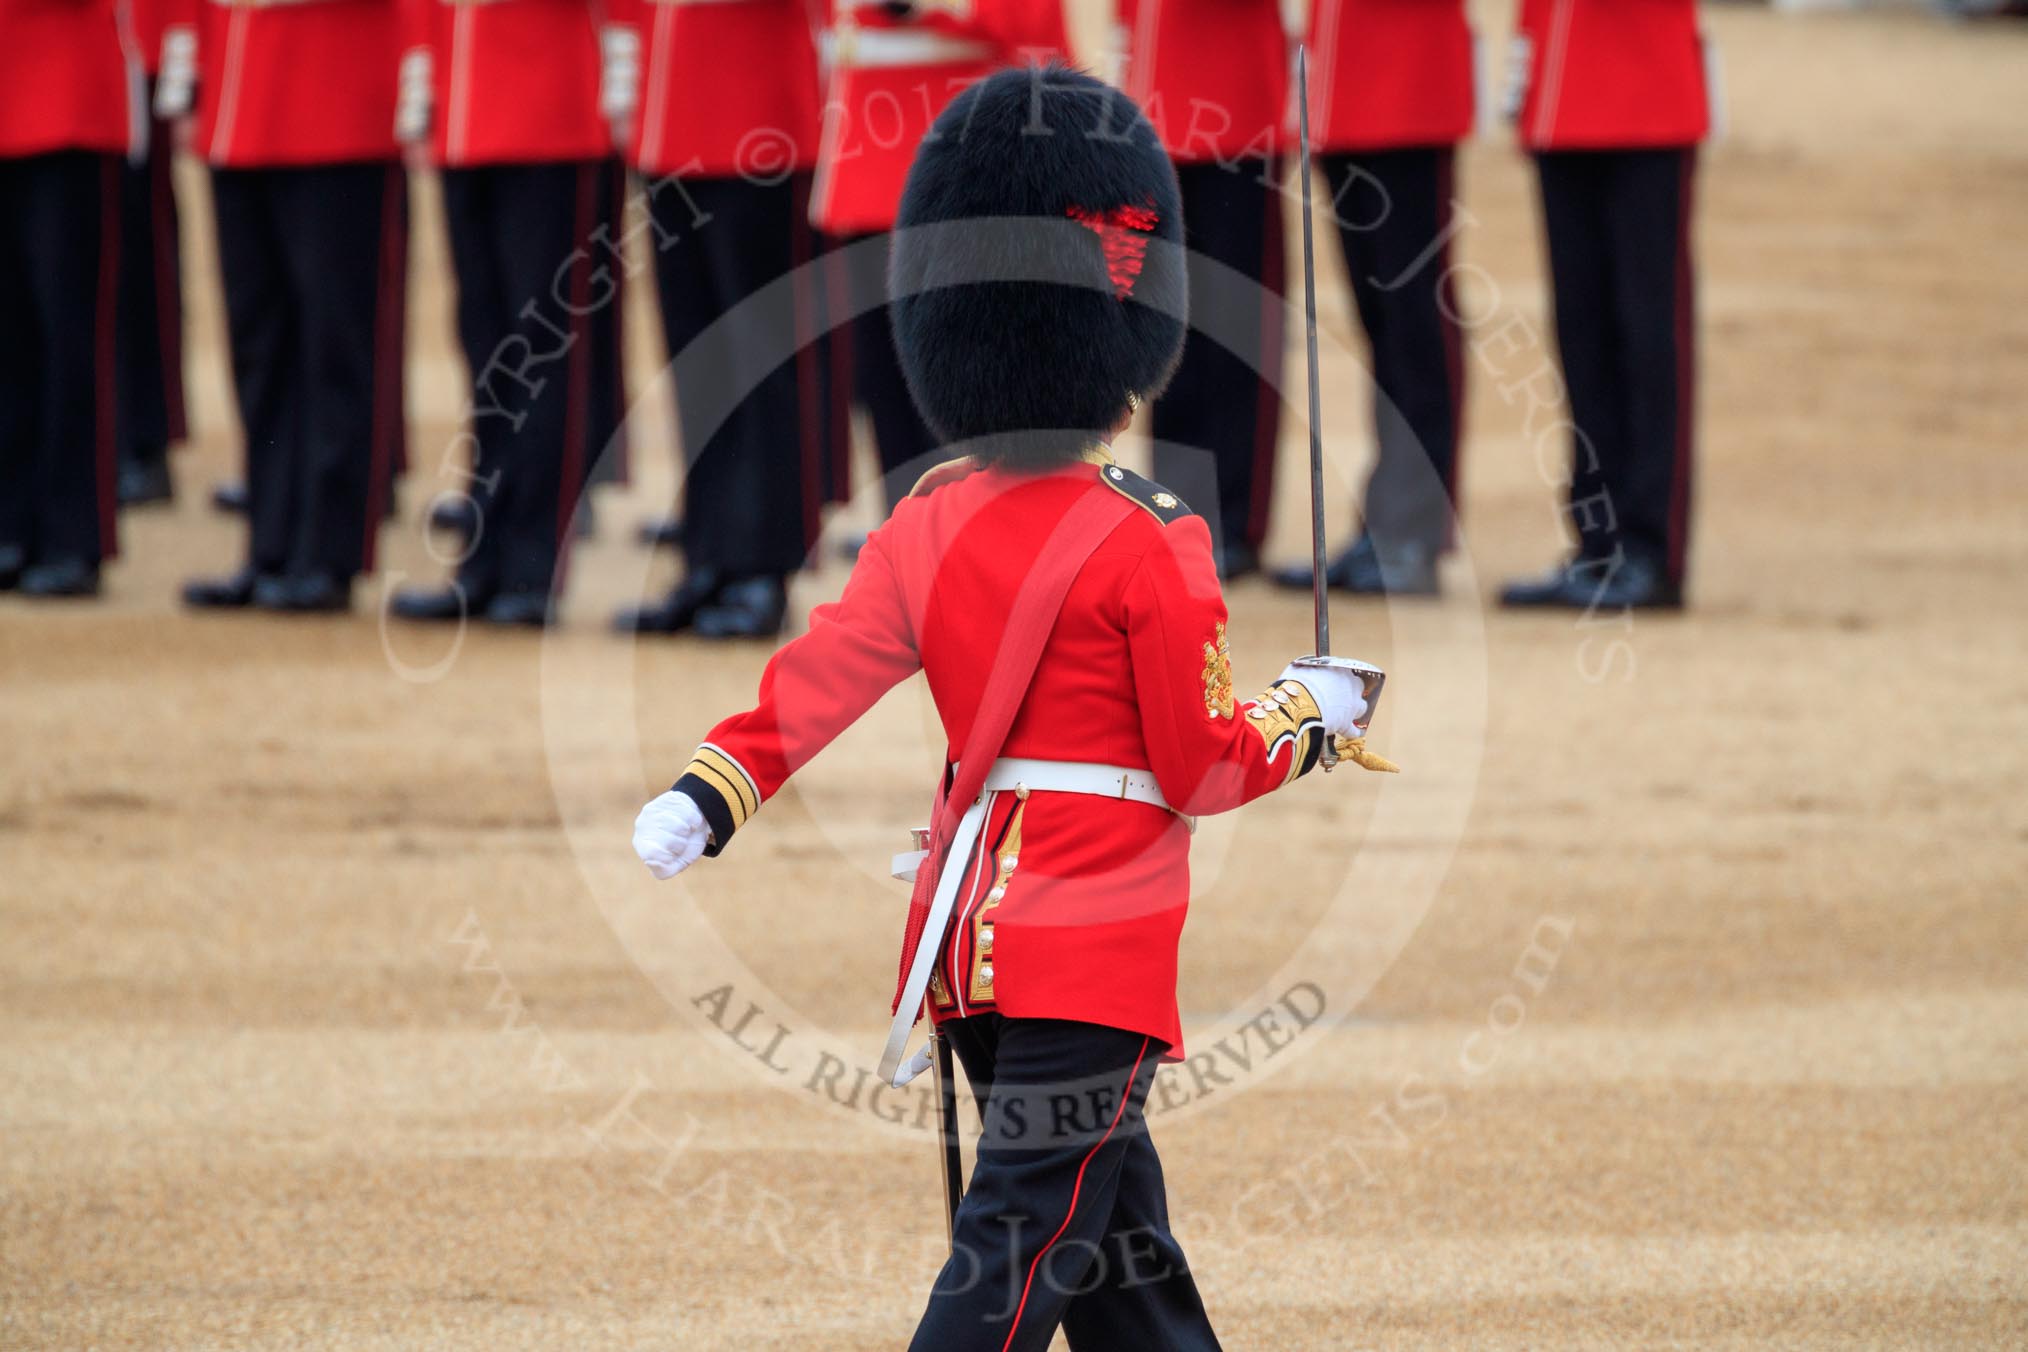 during The Colonel's Review {iptcyear4} (final rehearsal for Trooping the Colour, The Queen's Birthday Parade)  at Horse Guards Parade, Westminster, London, 2 June 2018, 11:20.